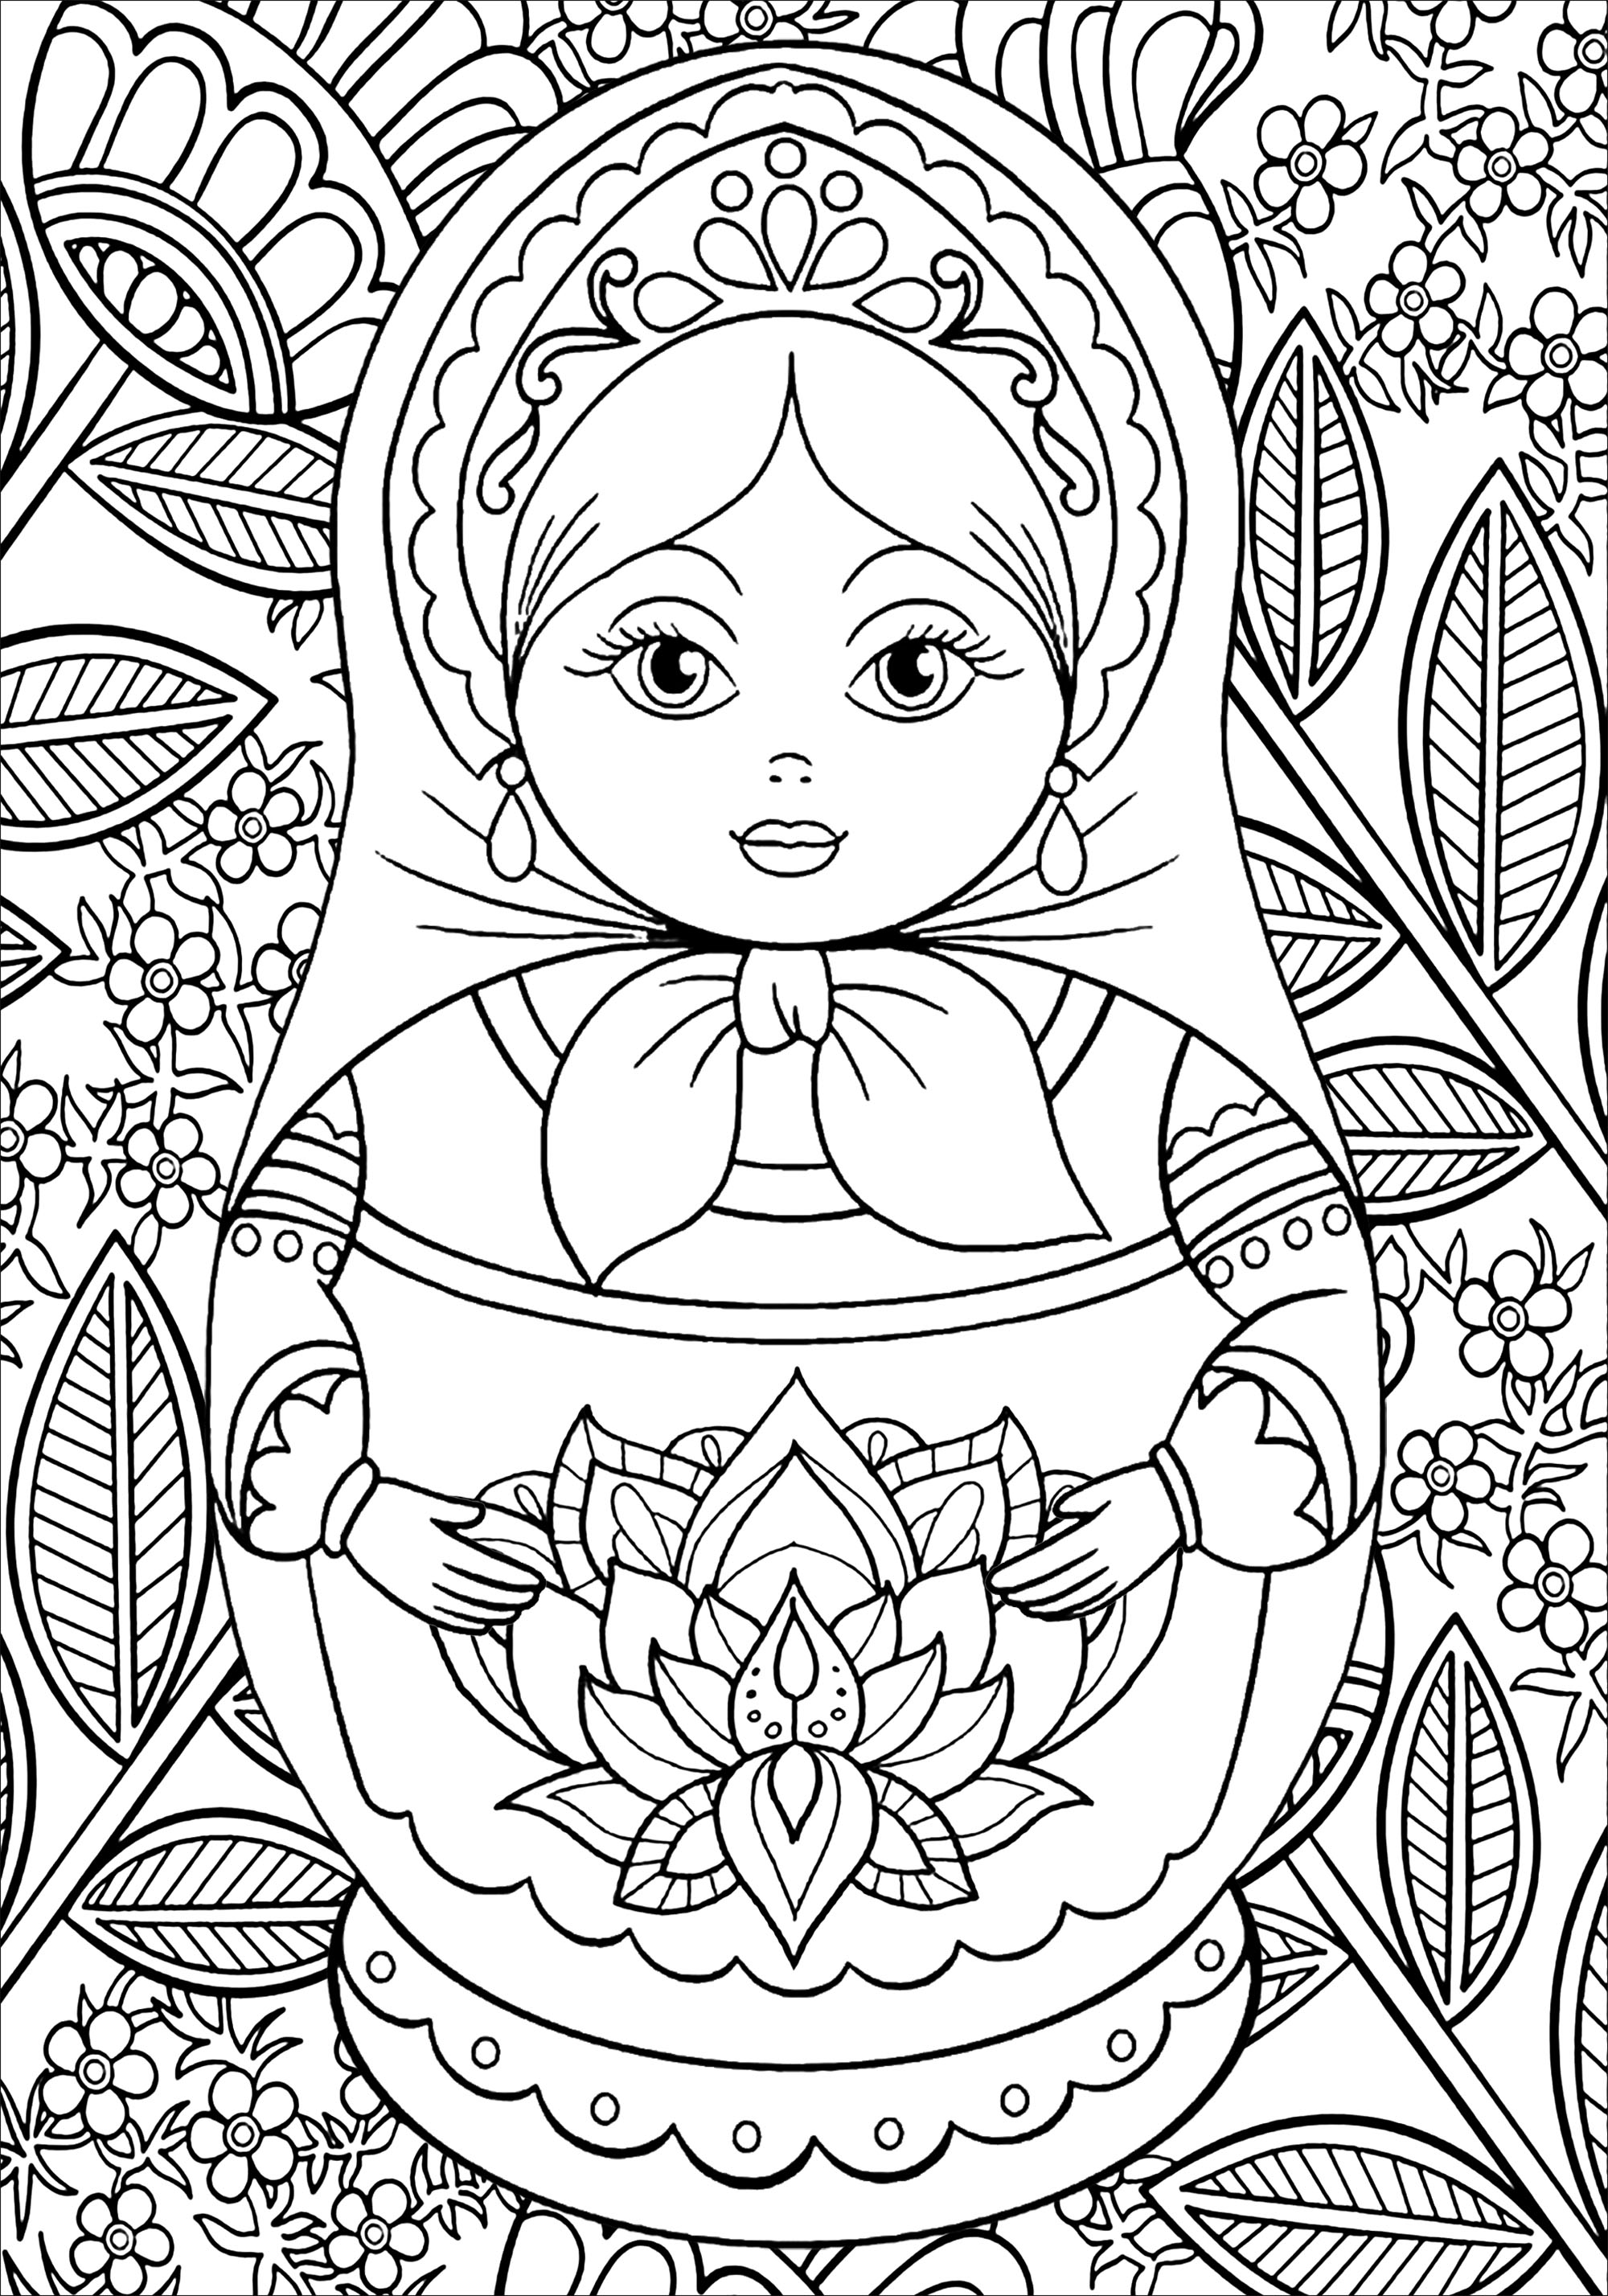 Russian doll in front of a flowery and leafy background, Artist : Art. Isabelle